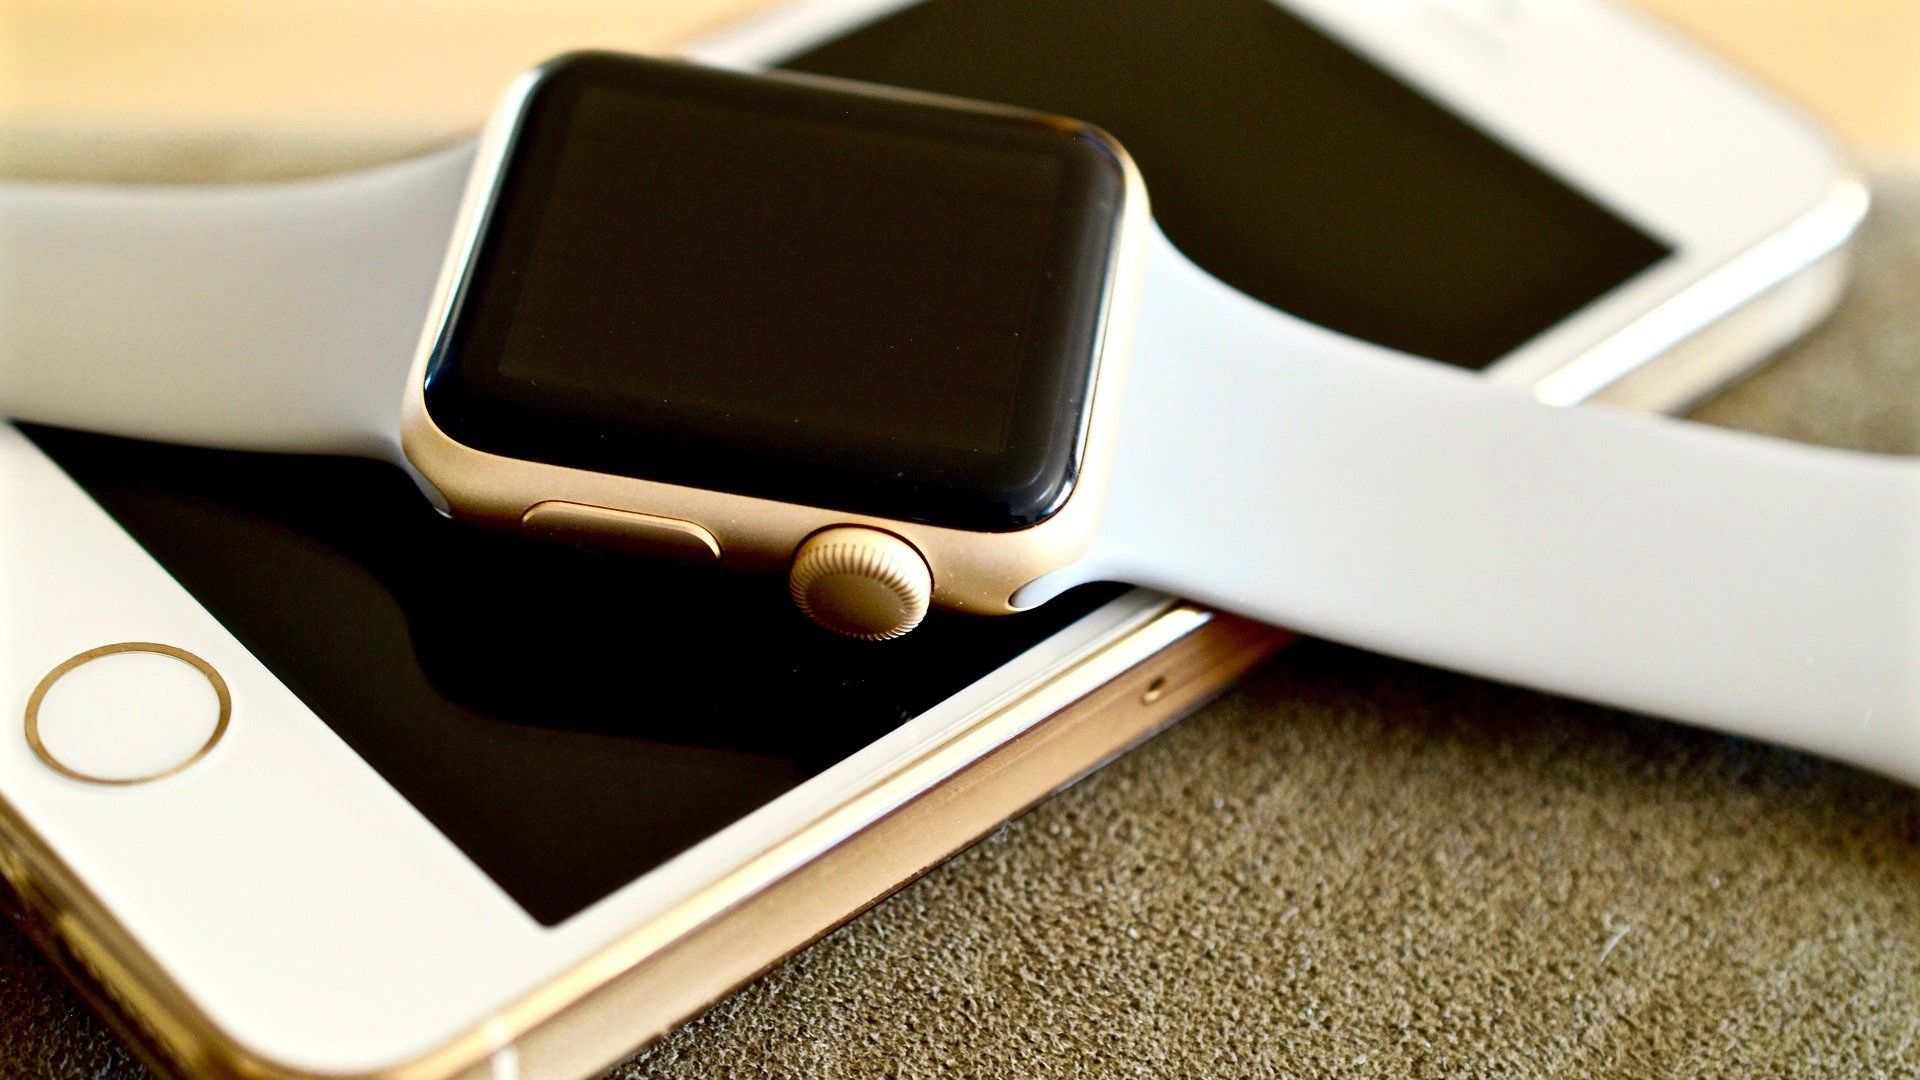 New survey shows nearly 80% of iPhone users wear Apple Smartwatch